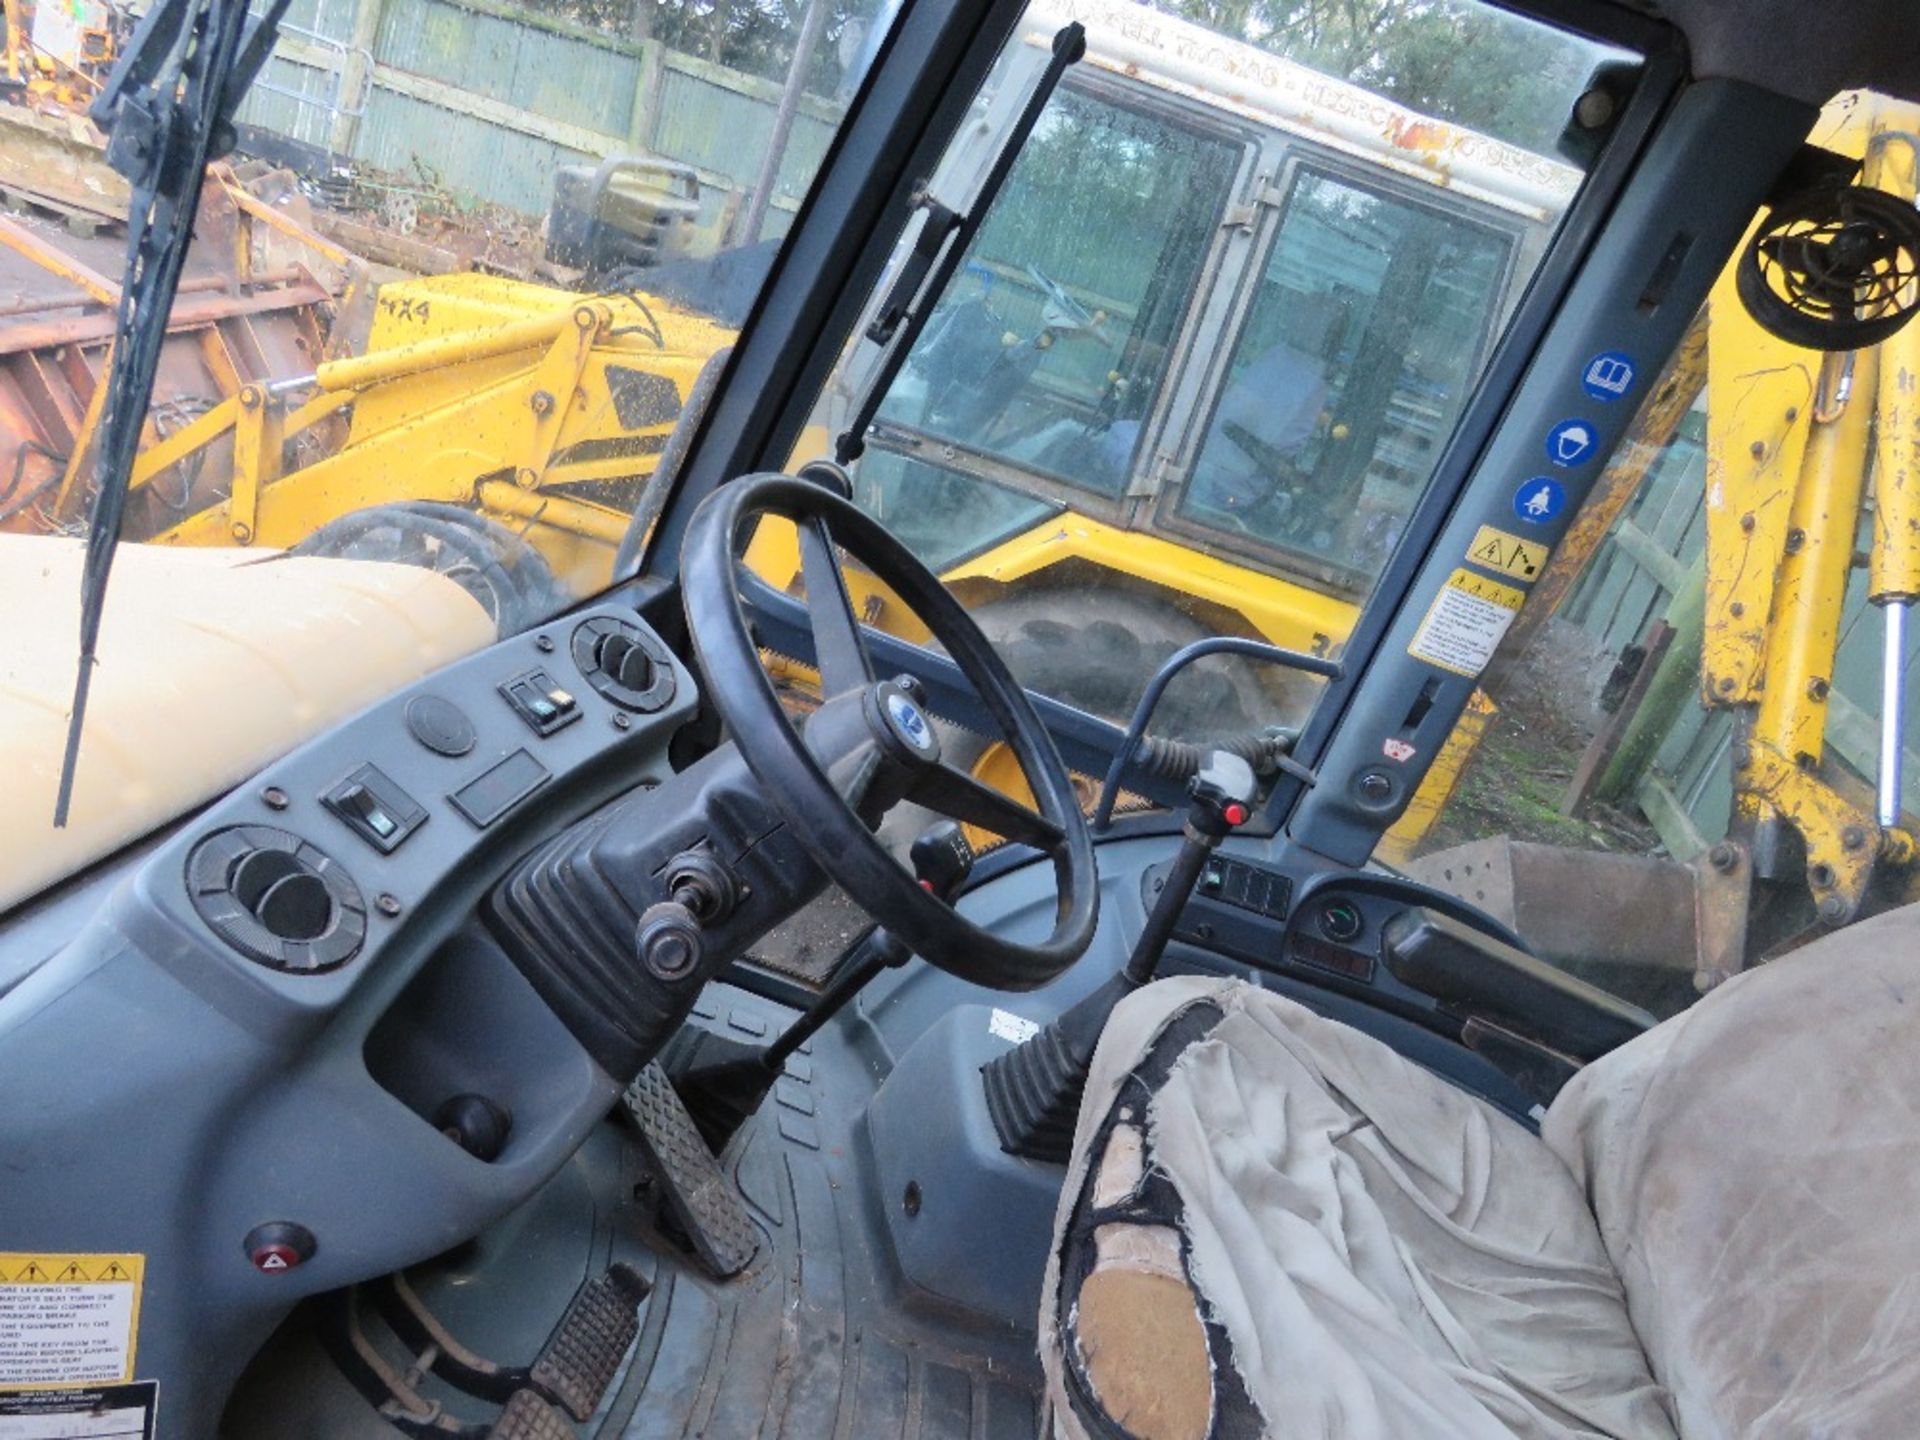 NEW HOLLAND 85 BACKHOE LOADER, REG: R978 JBJ. 8542 REC HOURS. WITH 4IN1 BUCKET AND ONE REAR BUCKET. - Image 8 of 10